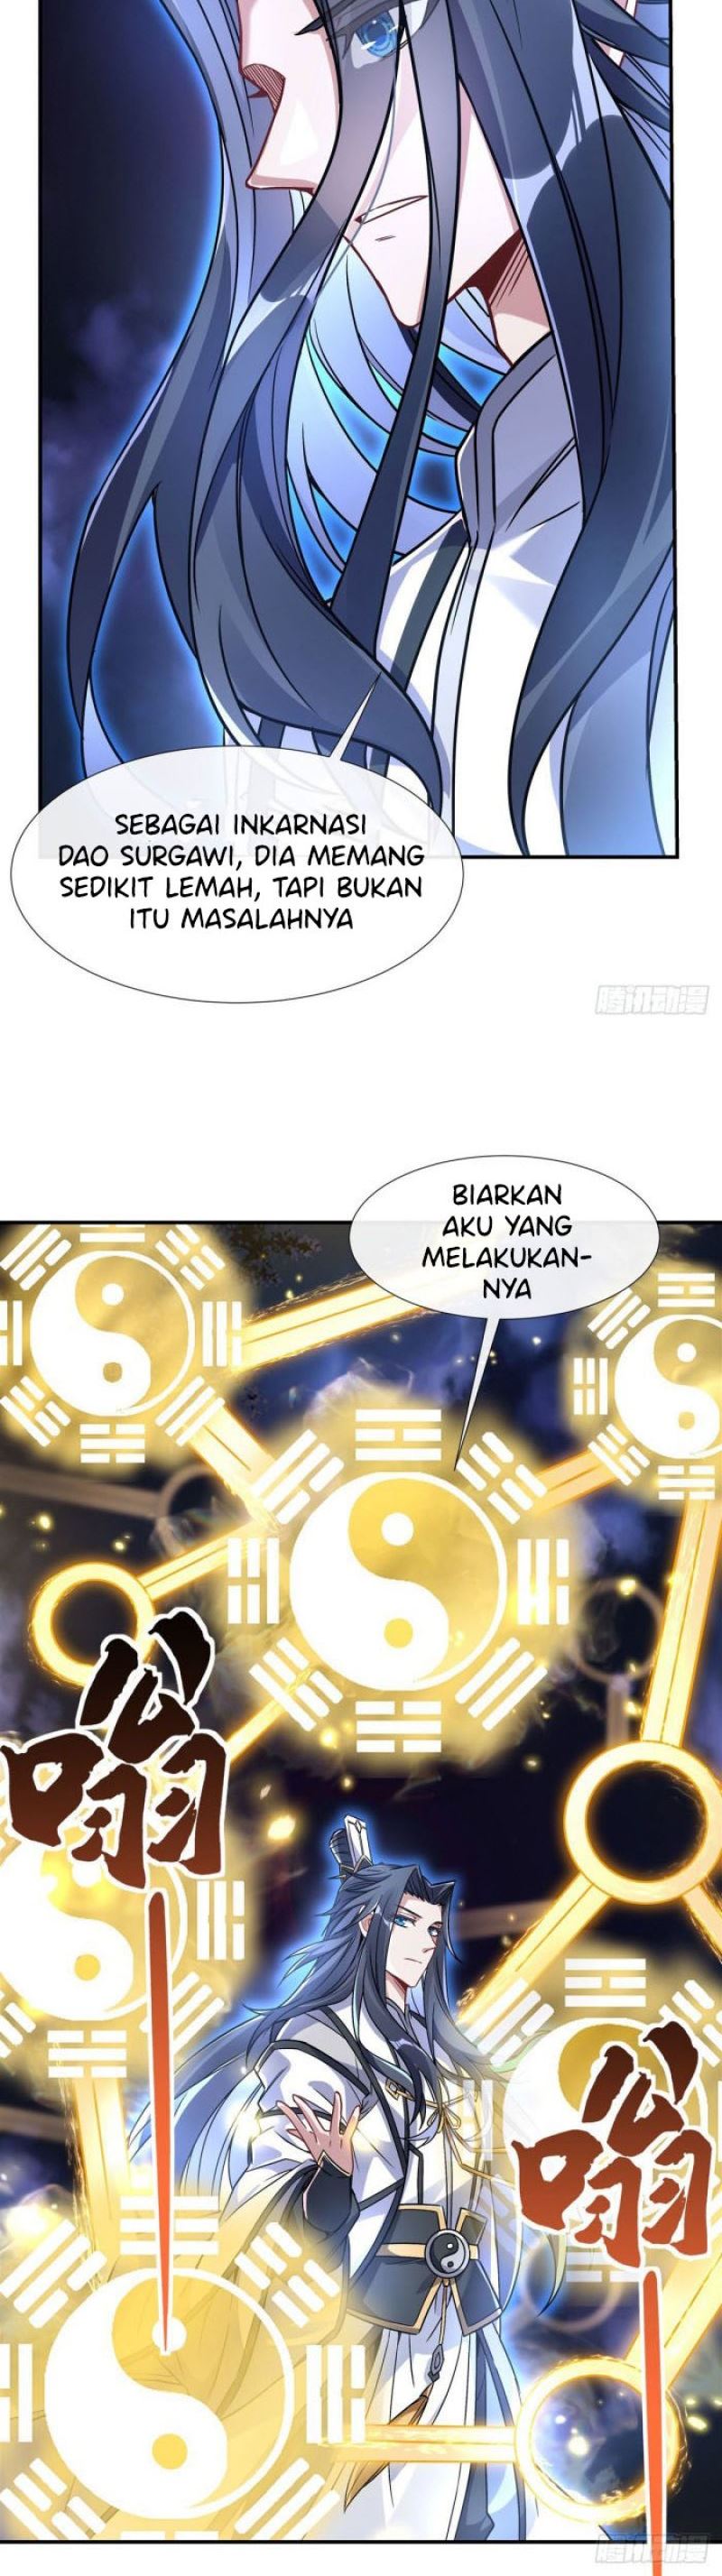 Dilarang COPAS - situs resmi www.mangacanblog.com - Komik my female apprentices are all big shots from the future 115 - chapter 115 116 Indonesia my female apprentices are all big shots from the future 115 - chapter 115 Terbaru 15|Baca Manga Komik Indonesia|Mangacan